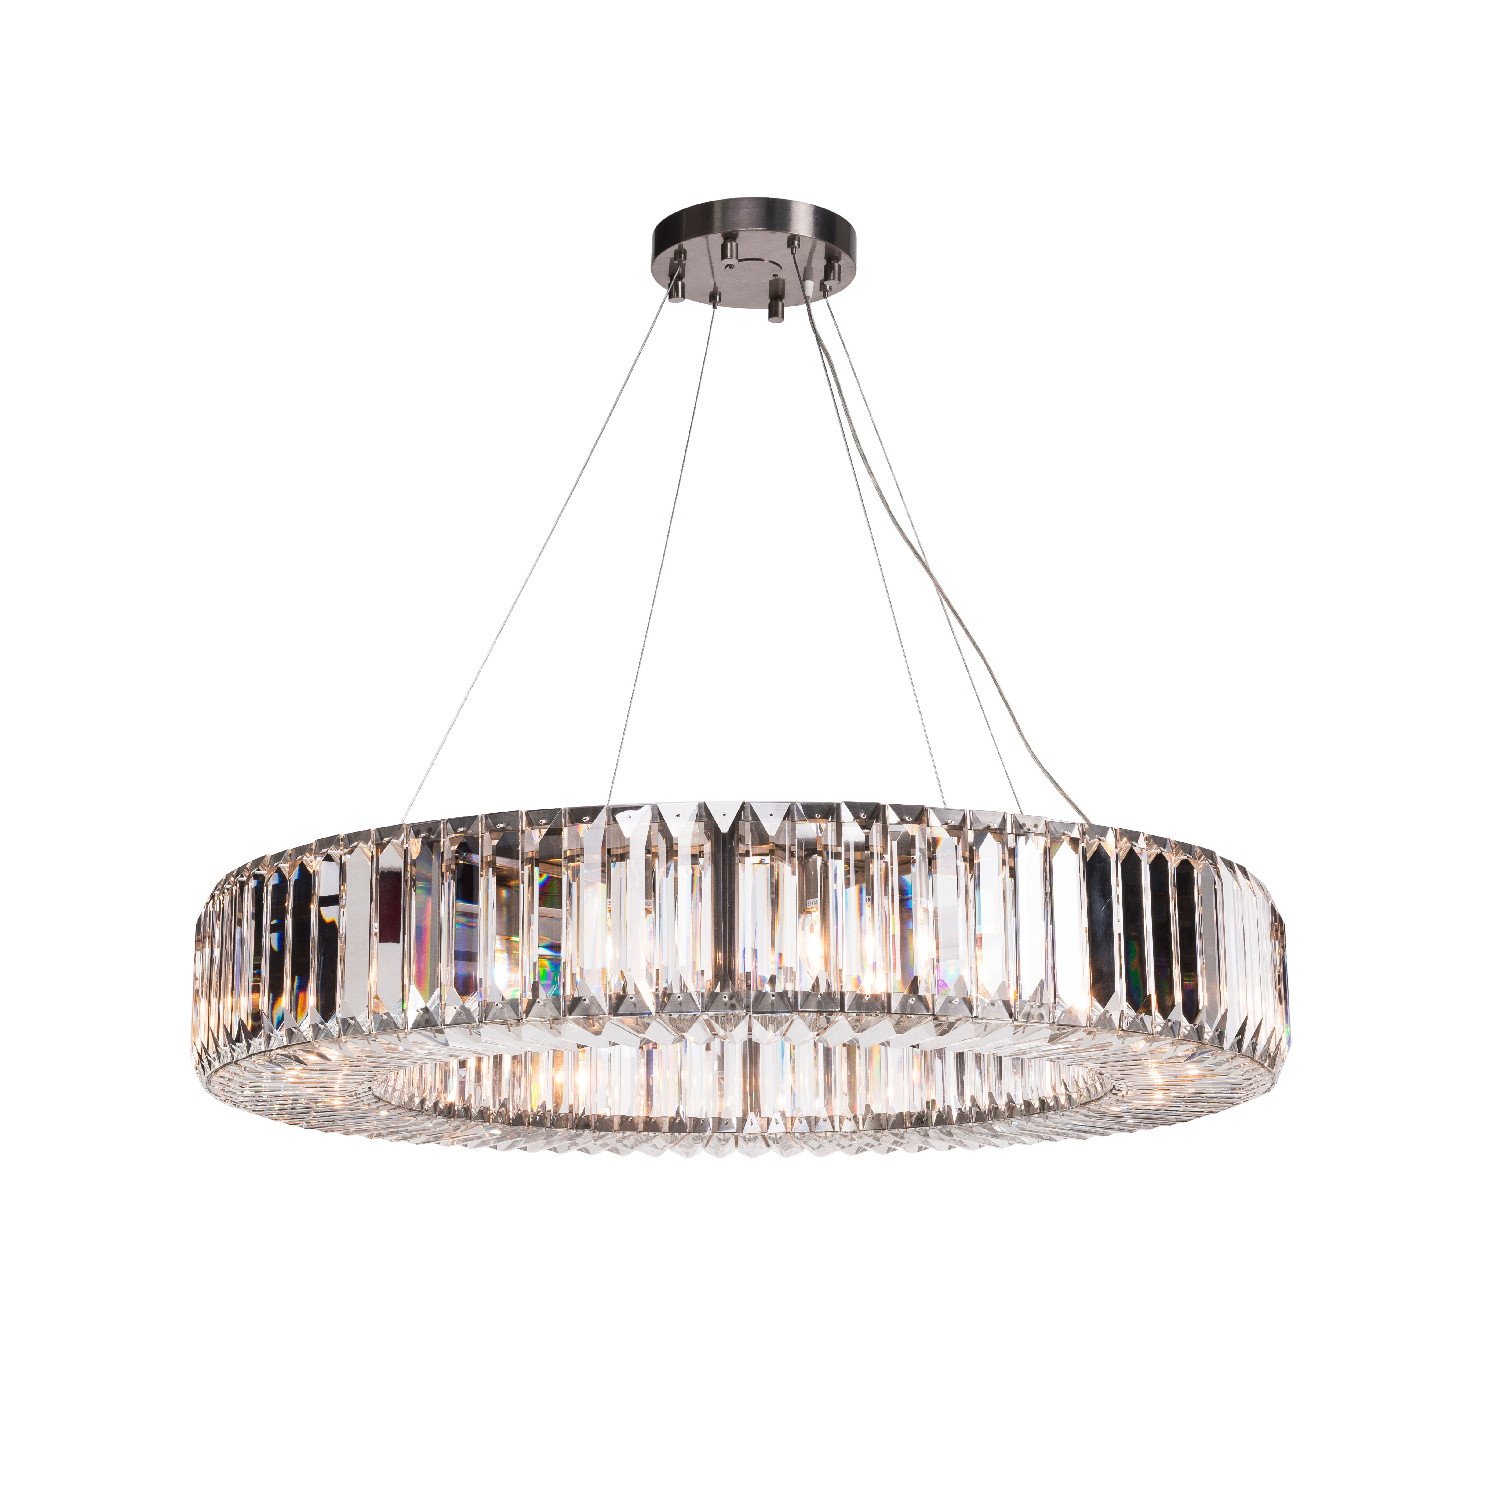 Photo of Timothy oulton herodes pendant 120cm light in silver